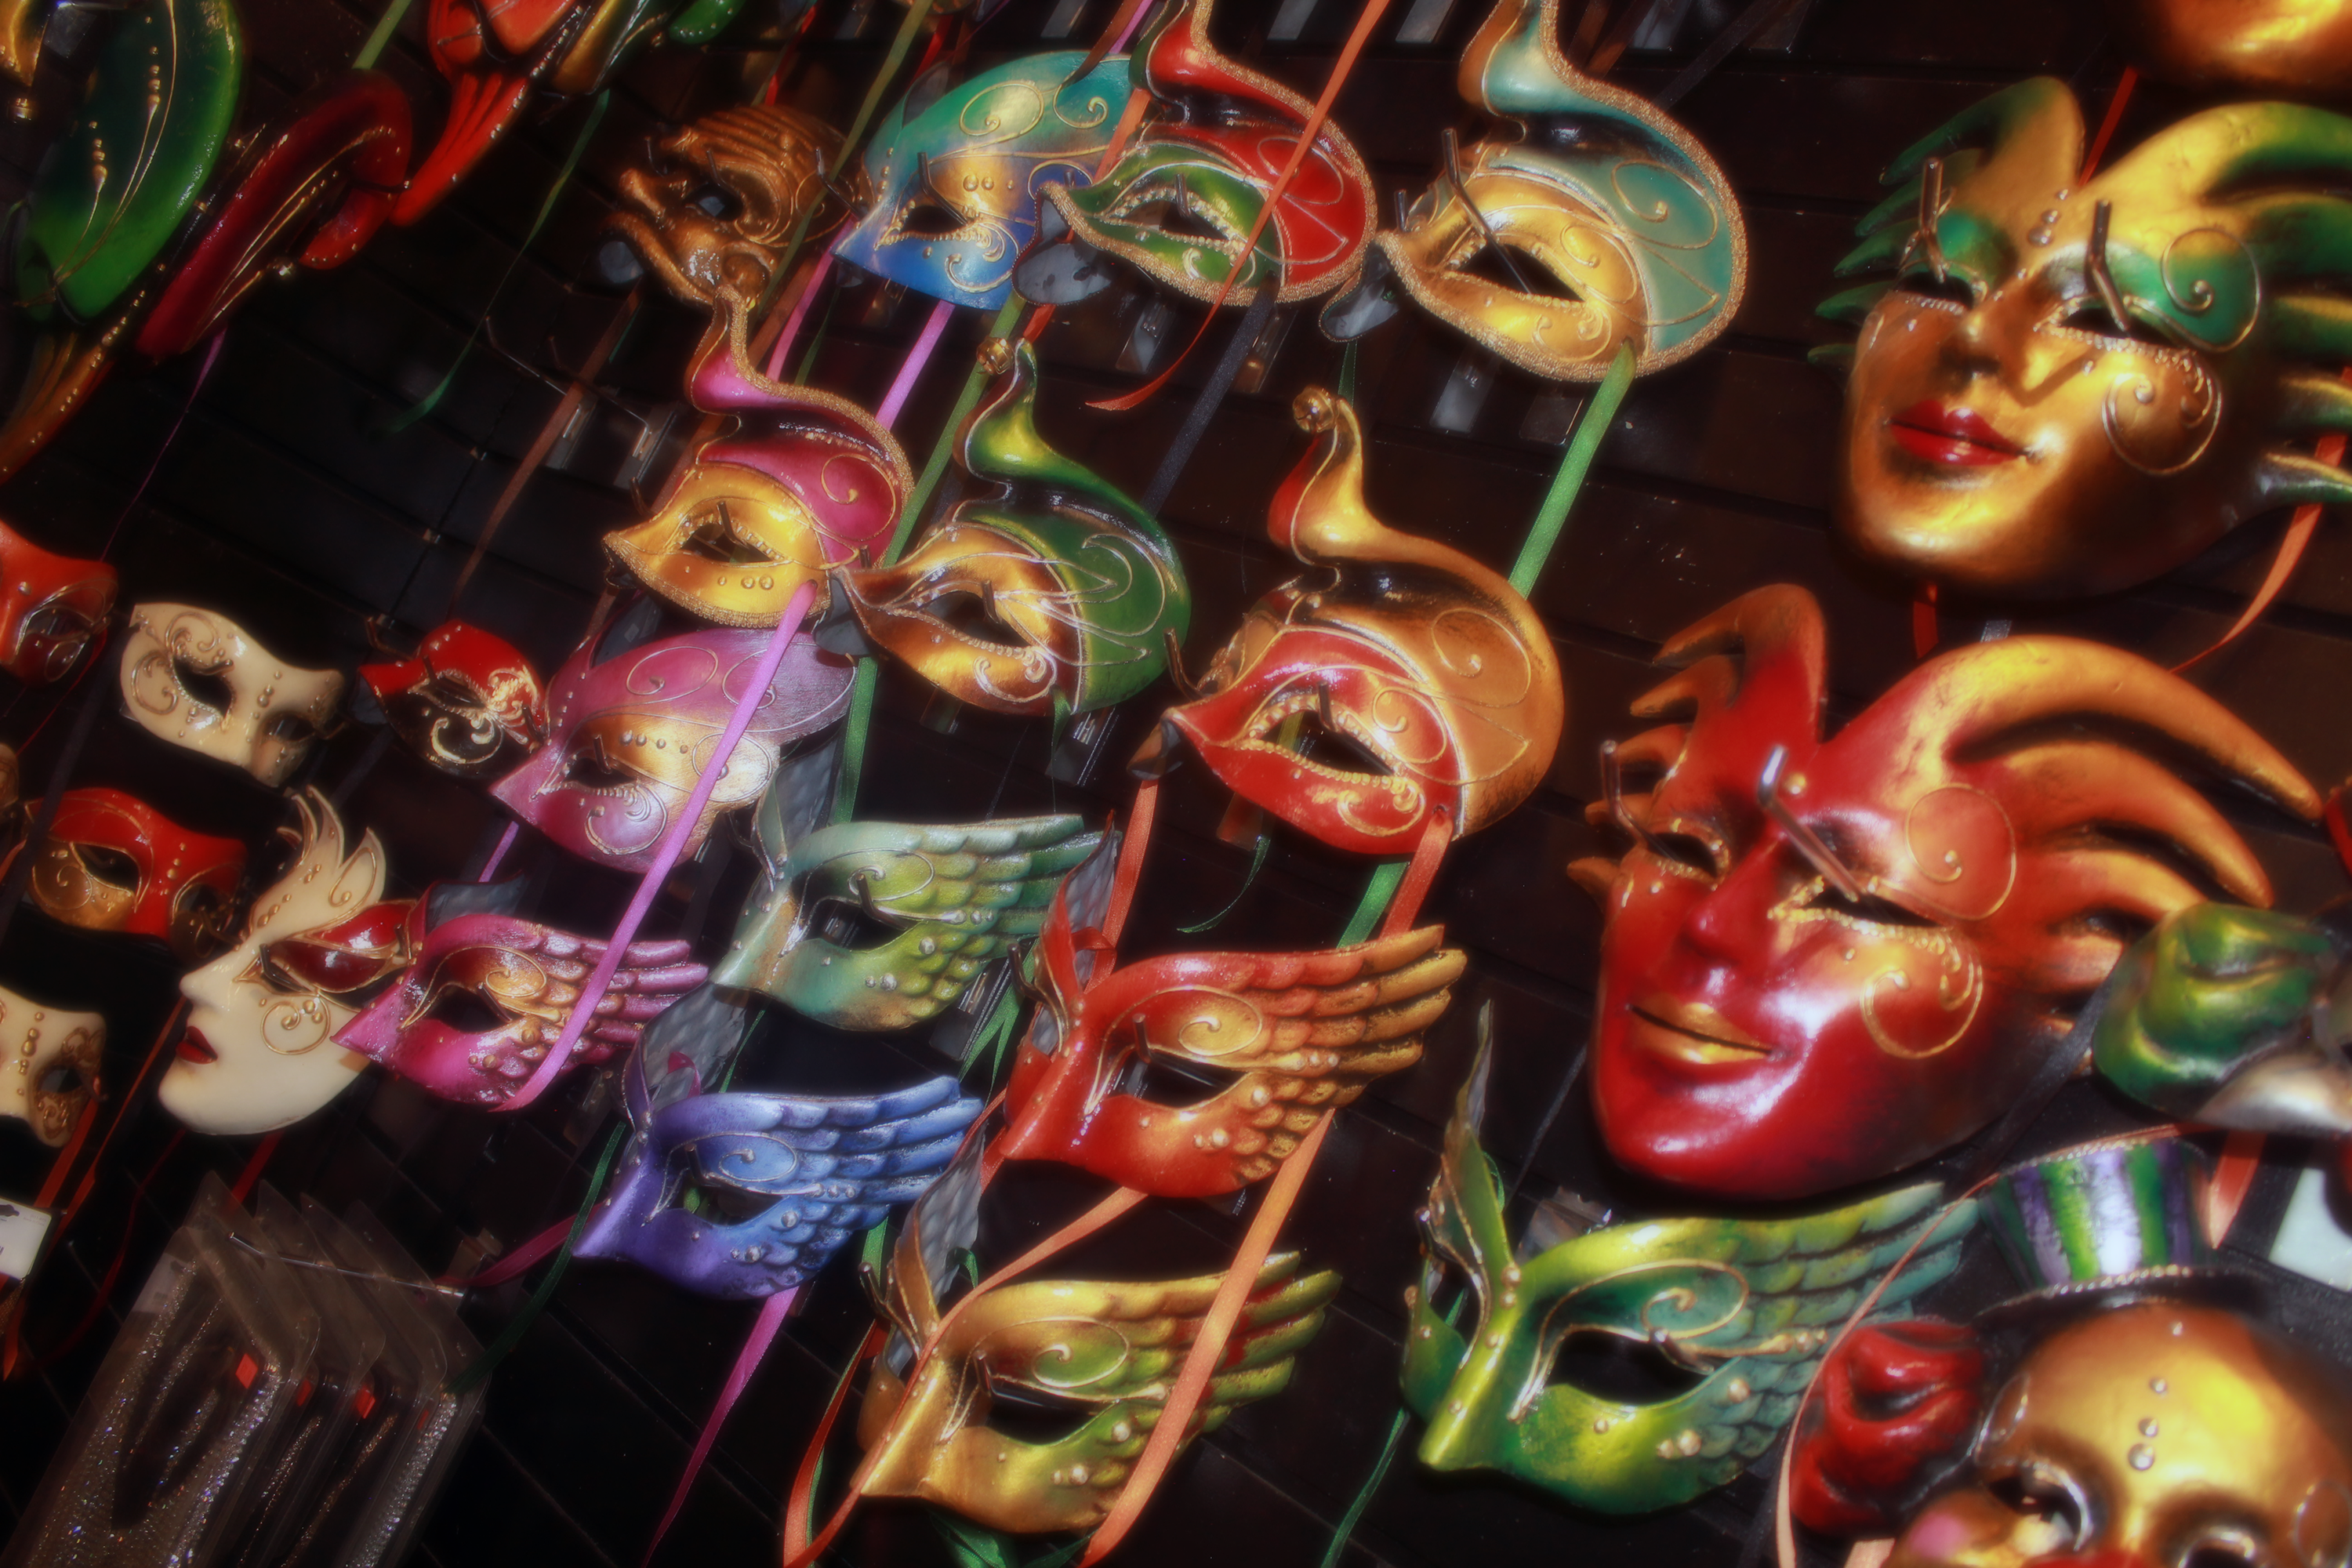 Wall of beautiful handmade paper-mache masquerade masks in NYC goth store